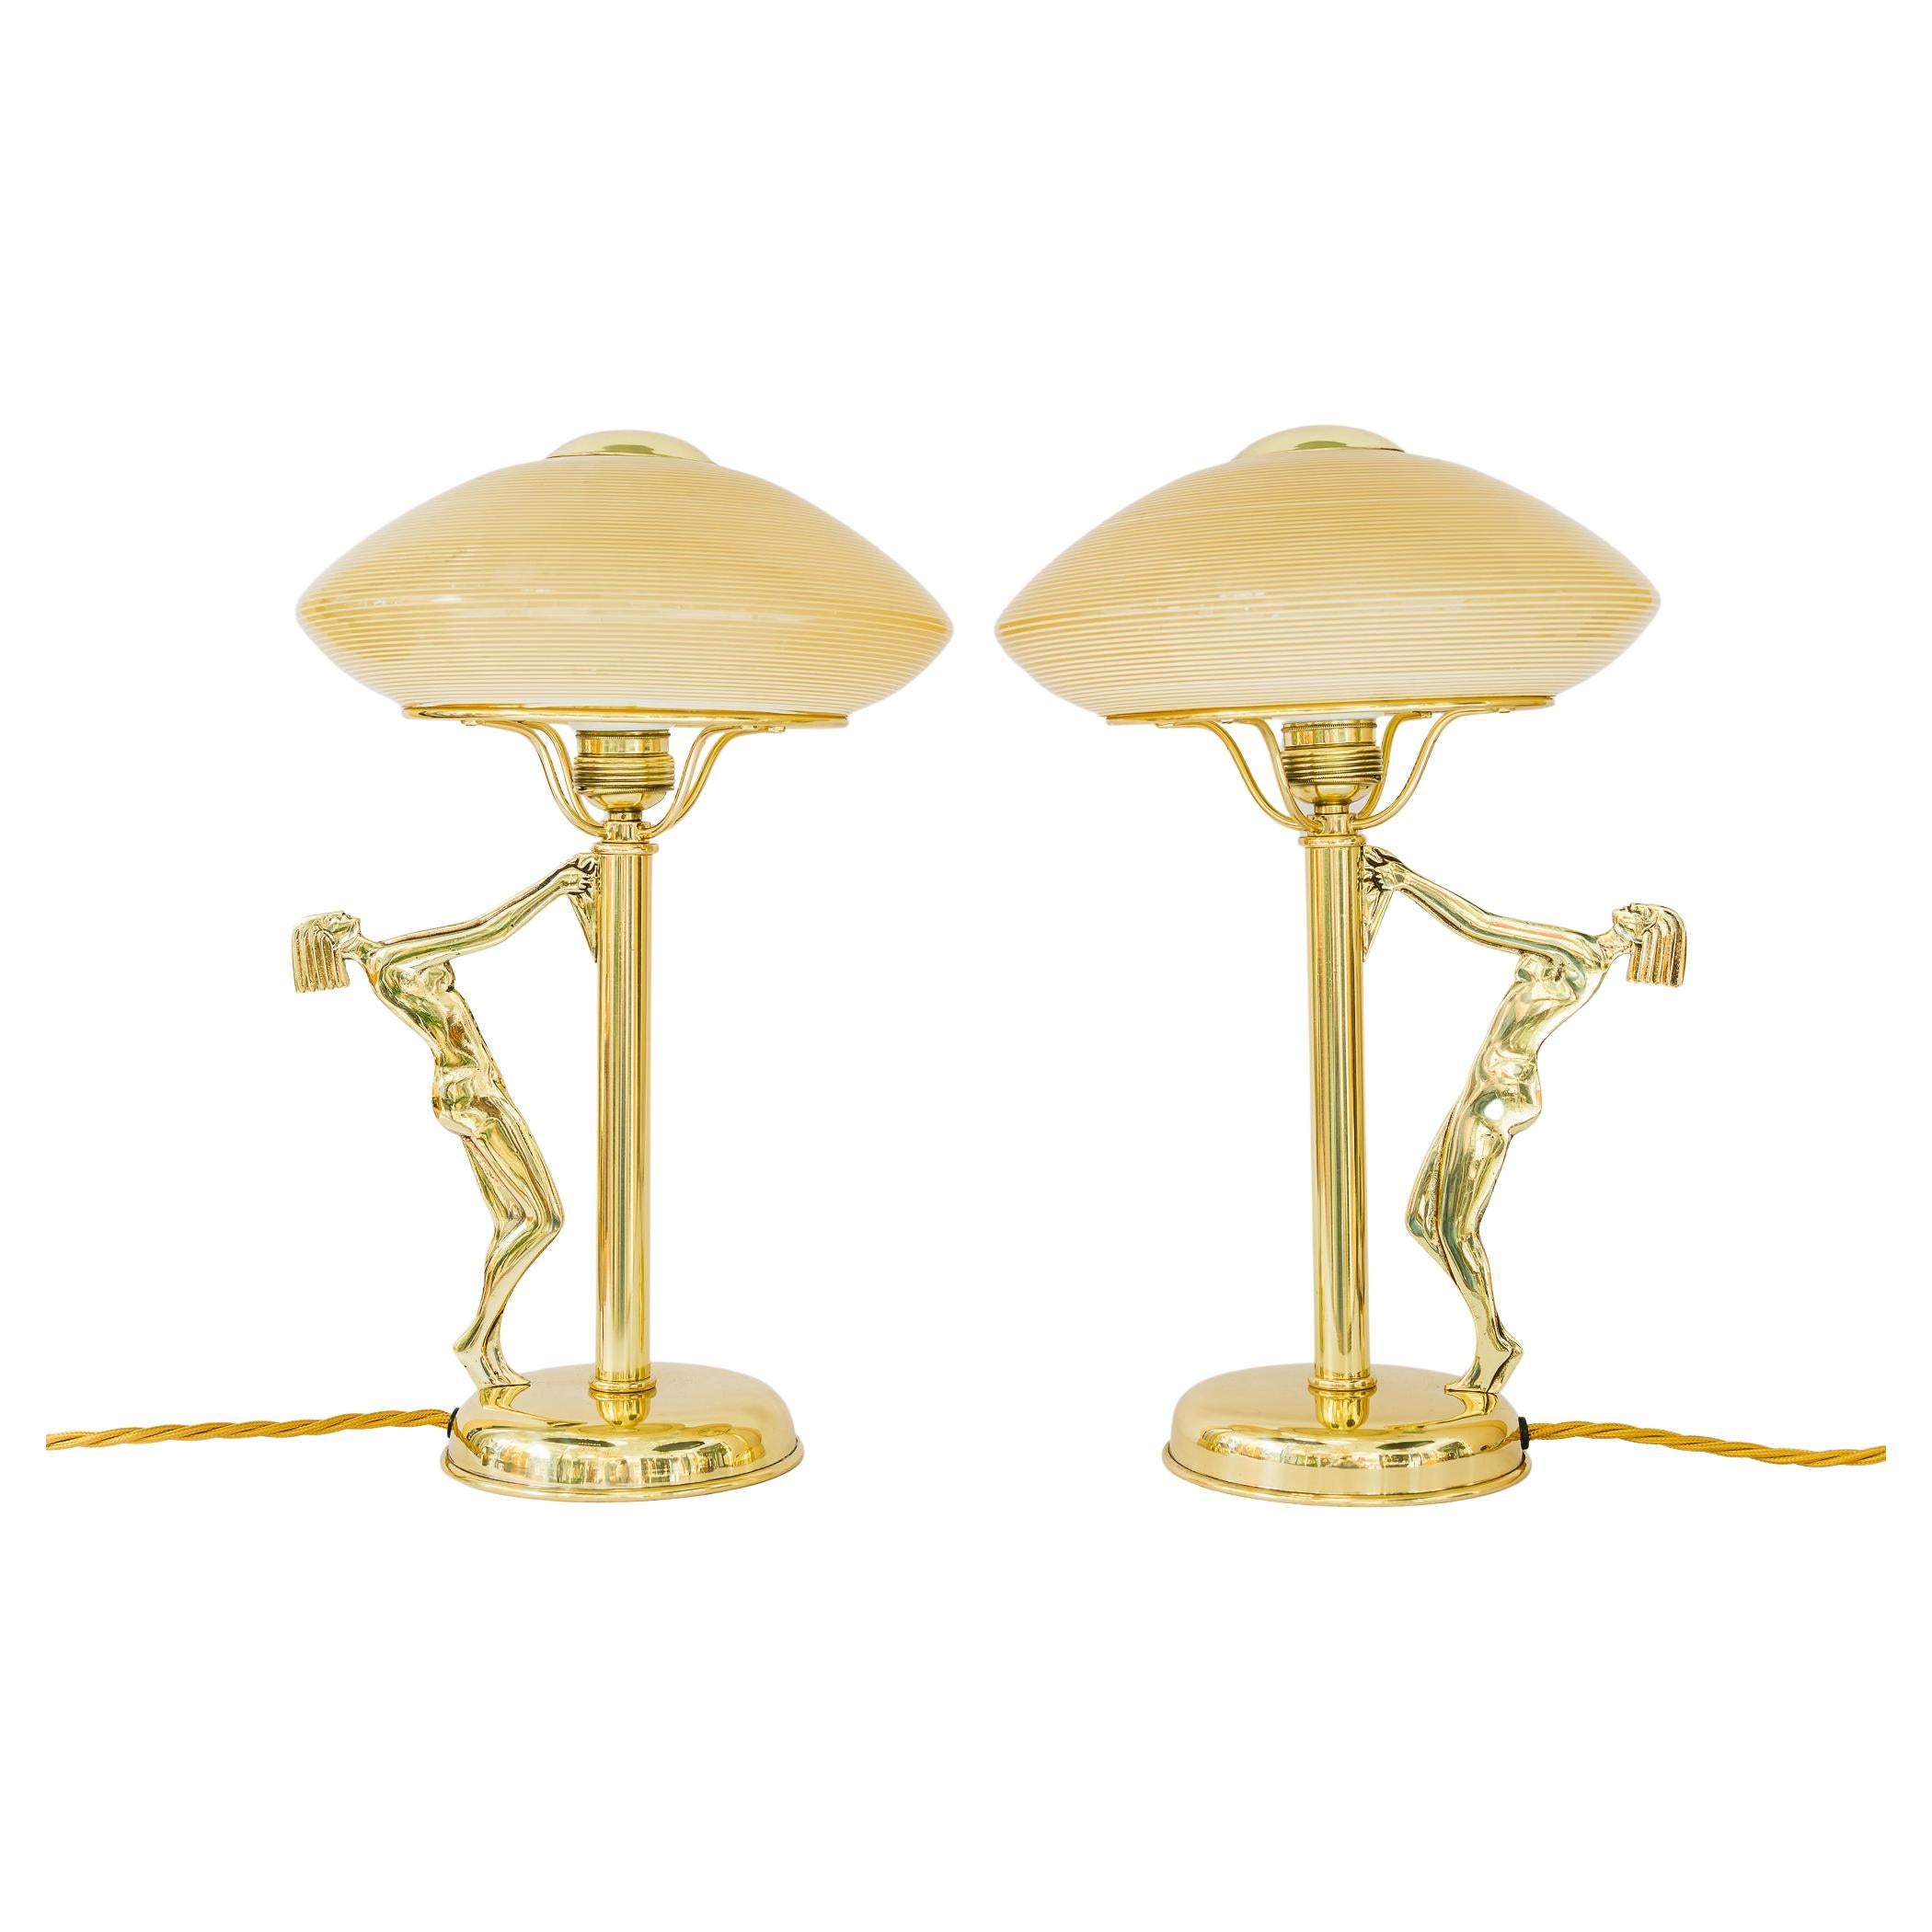 2 Art Deco Table Lamps with Original Glass Shades, circa 1920s, France For Sale